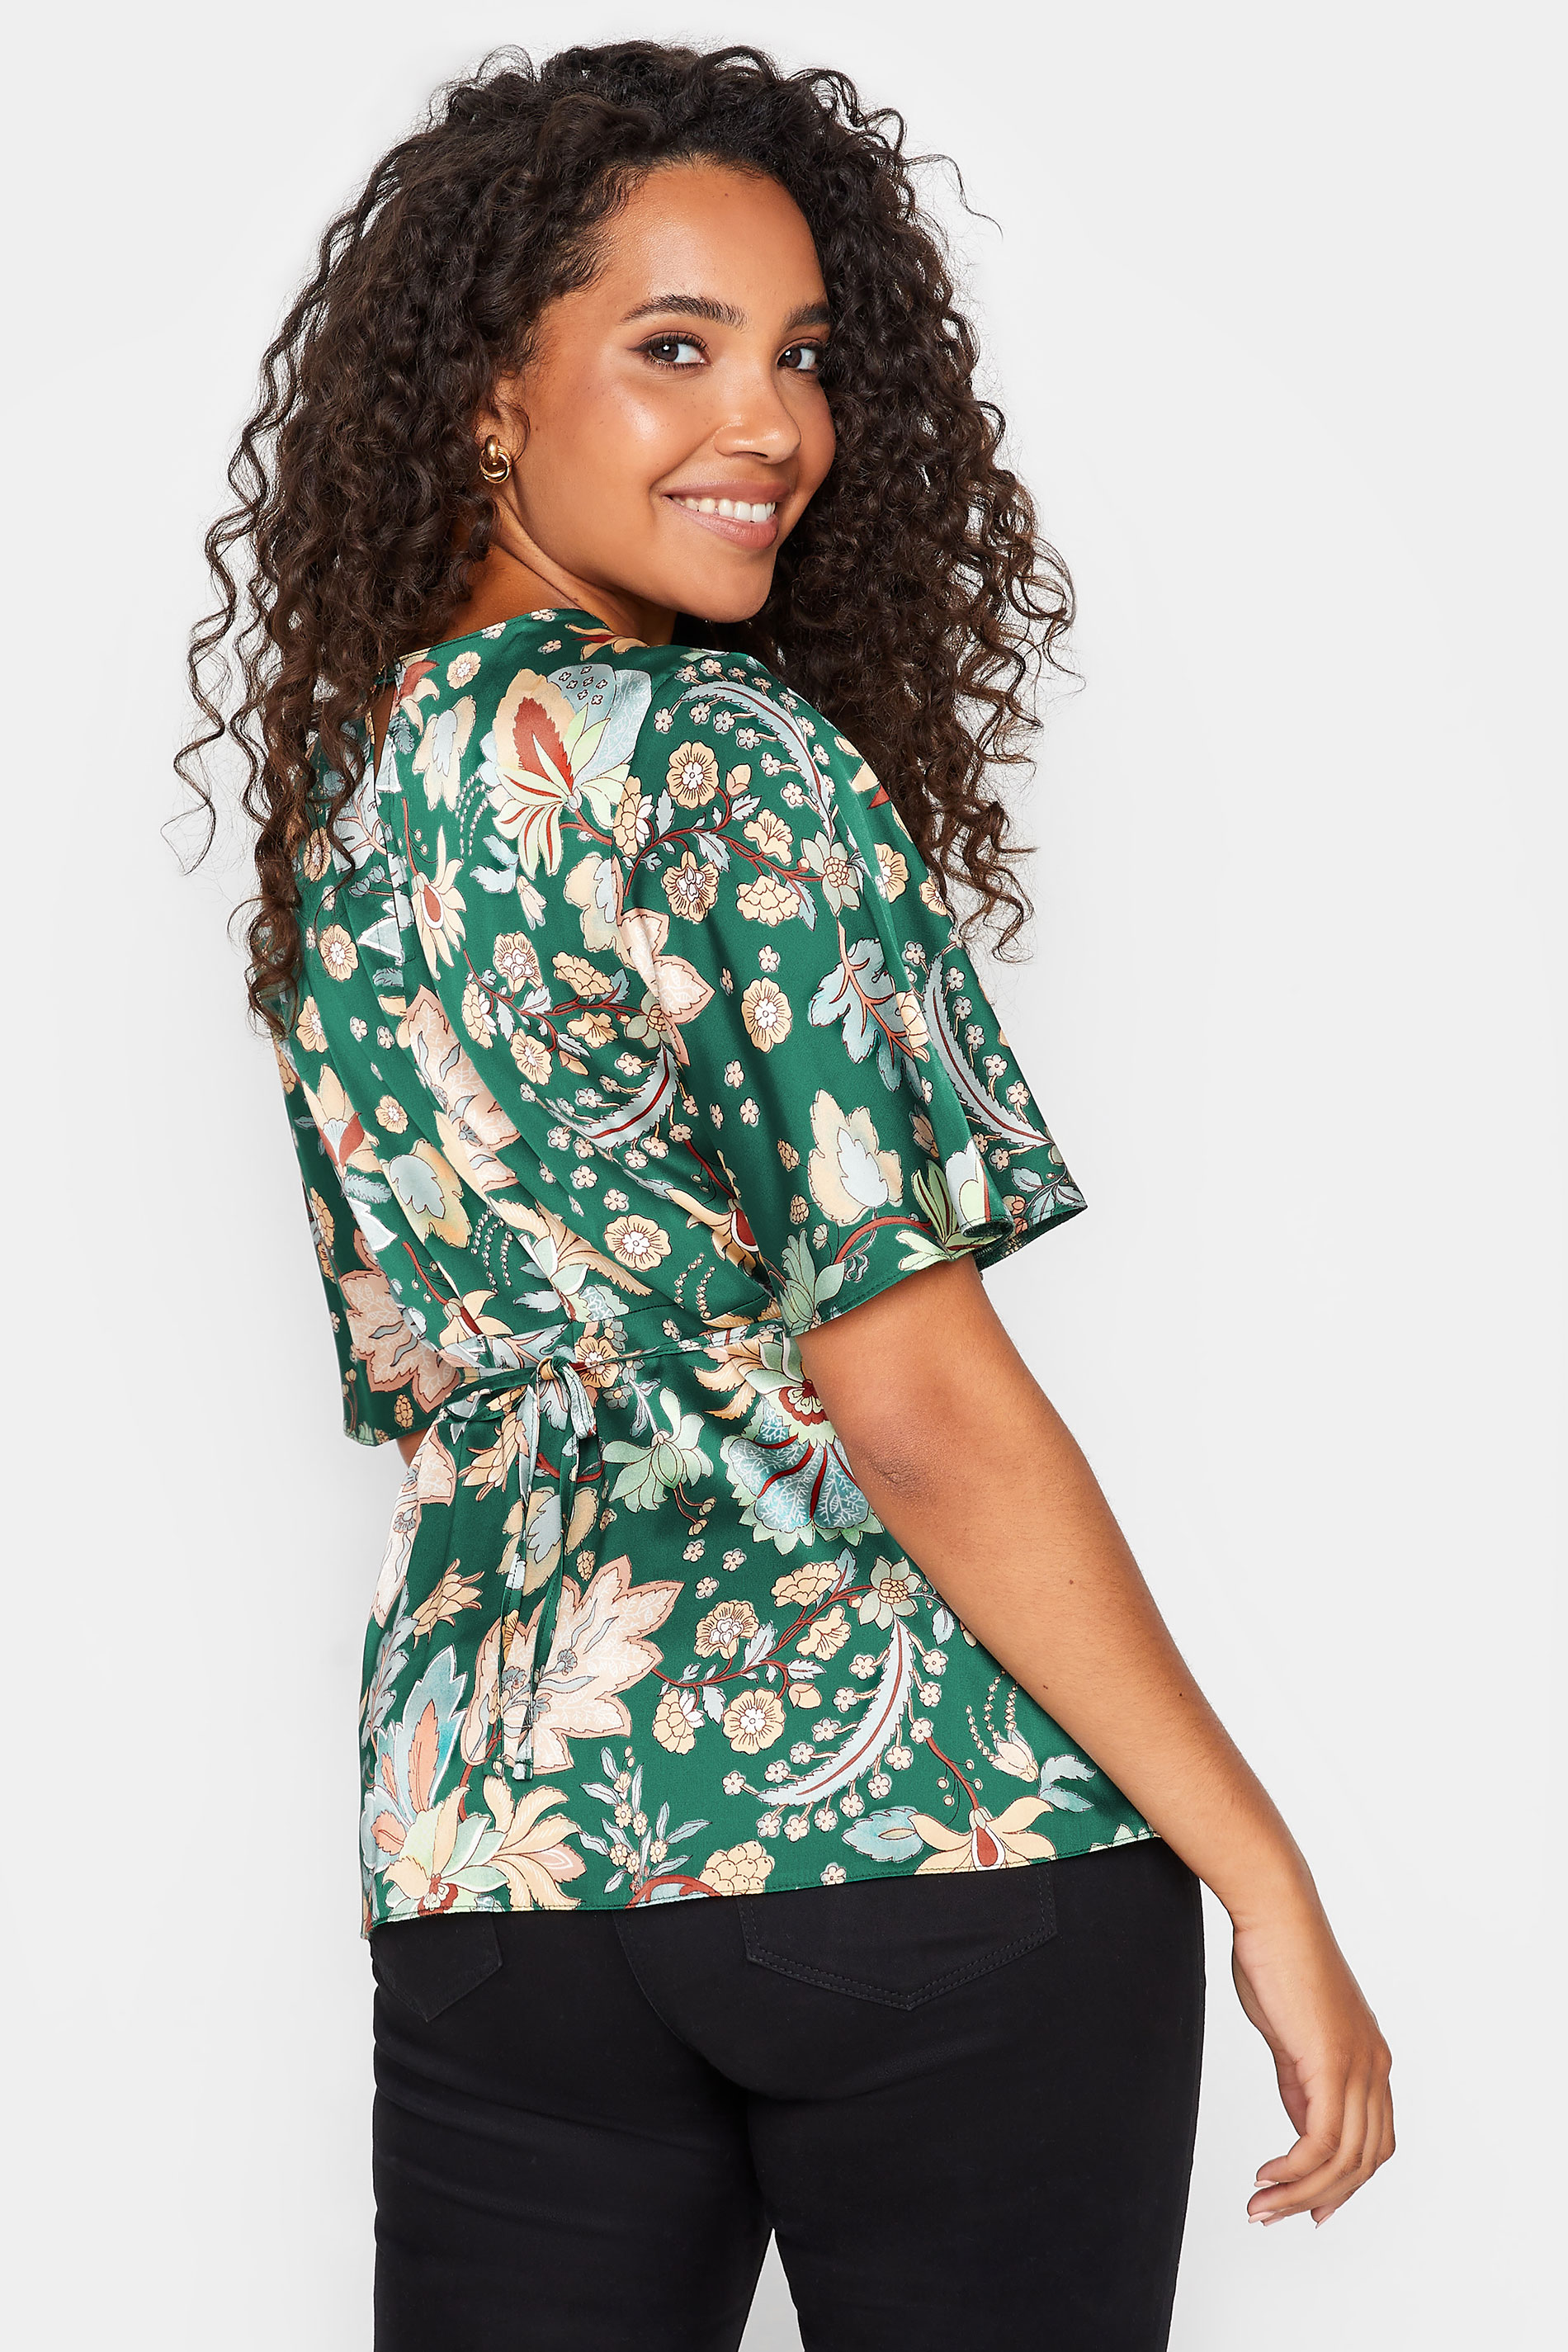 M&Co Dark Green Floral Tie Back Blouse | M&Co 3